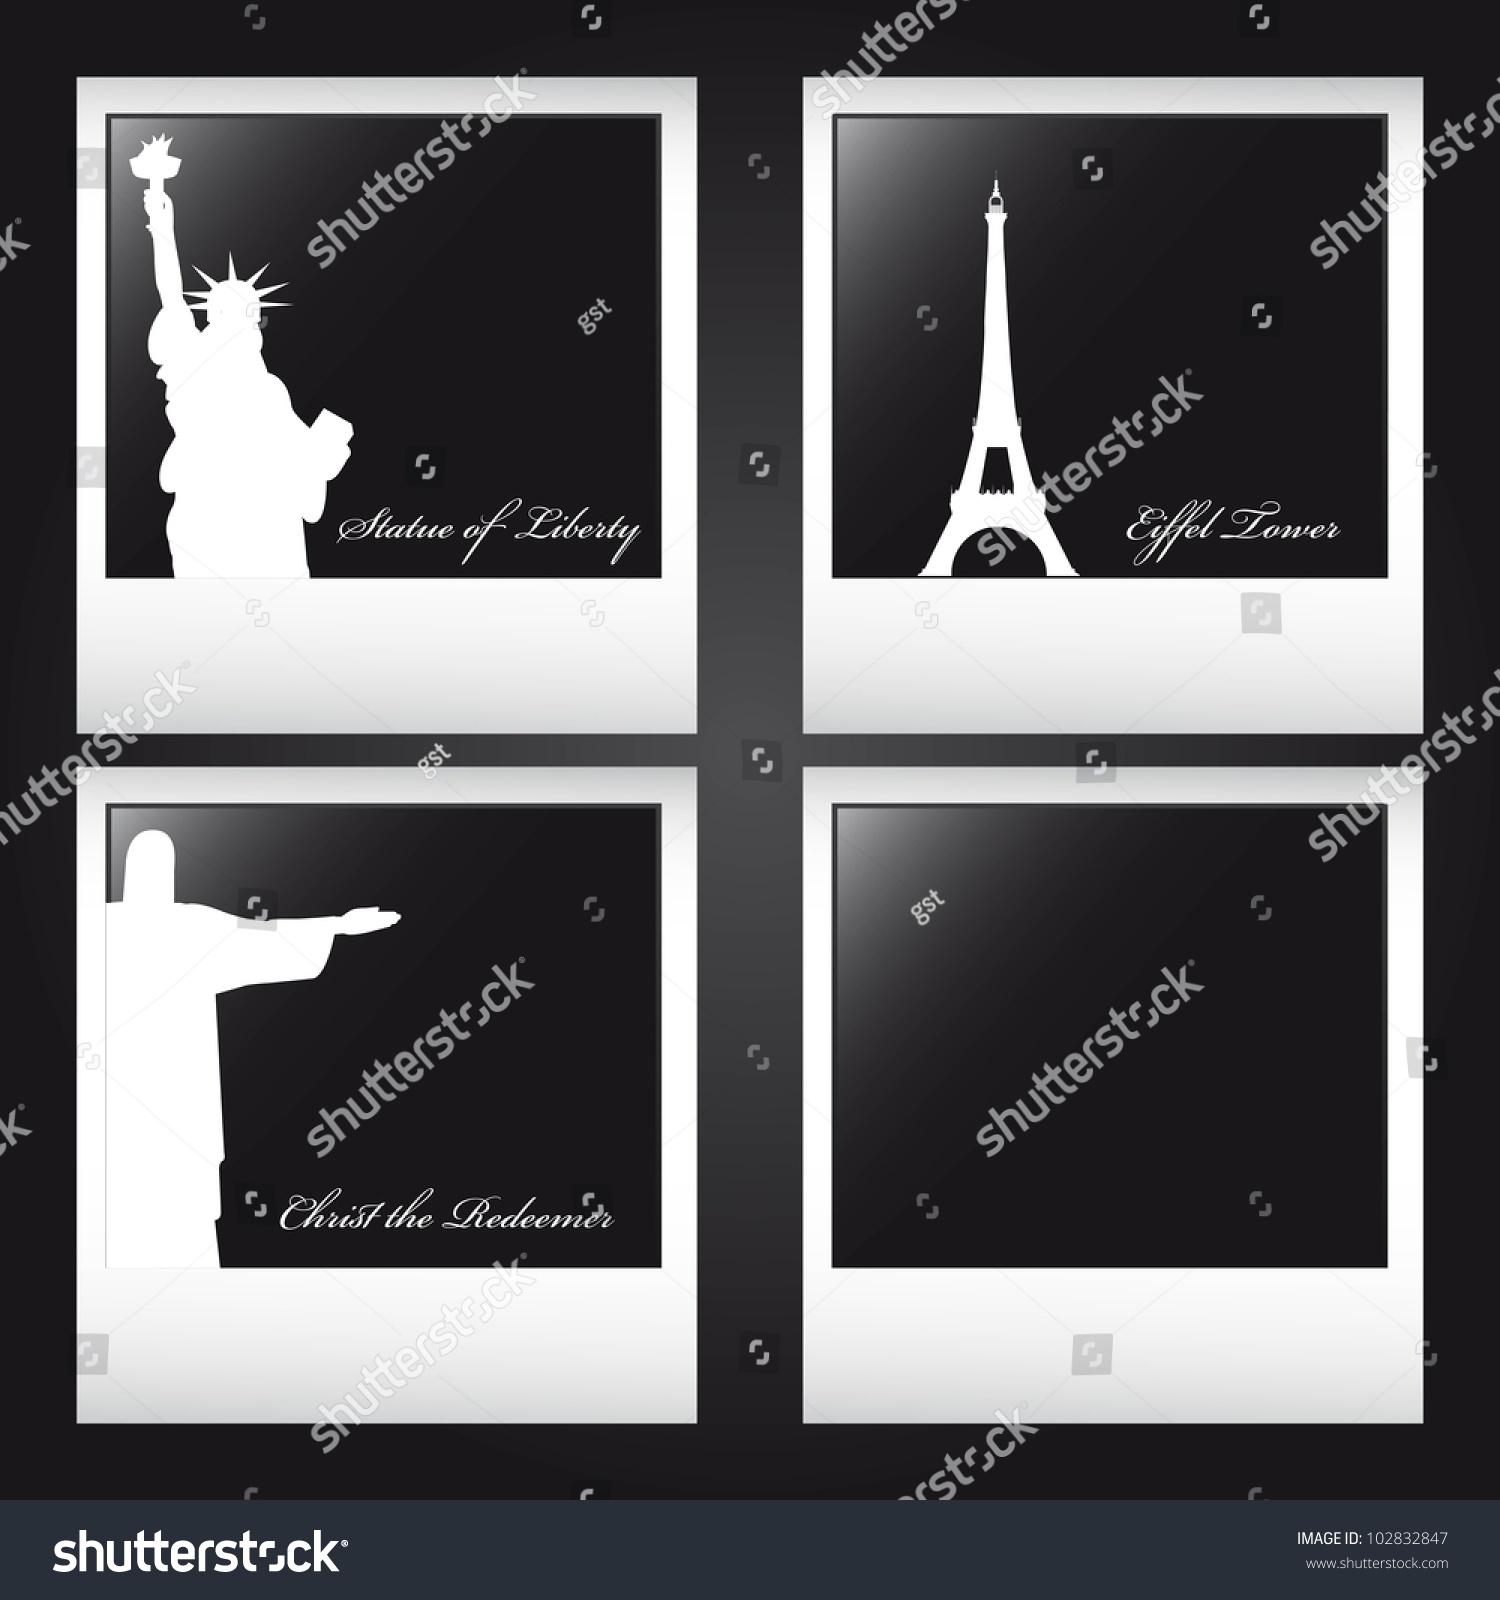 SVG of silhouettes world monuments over photo frame. vector illustration svg